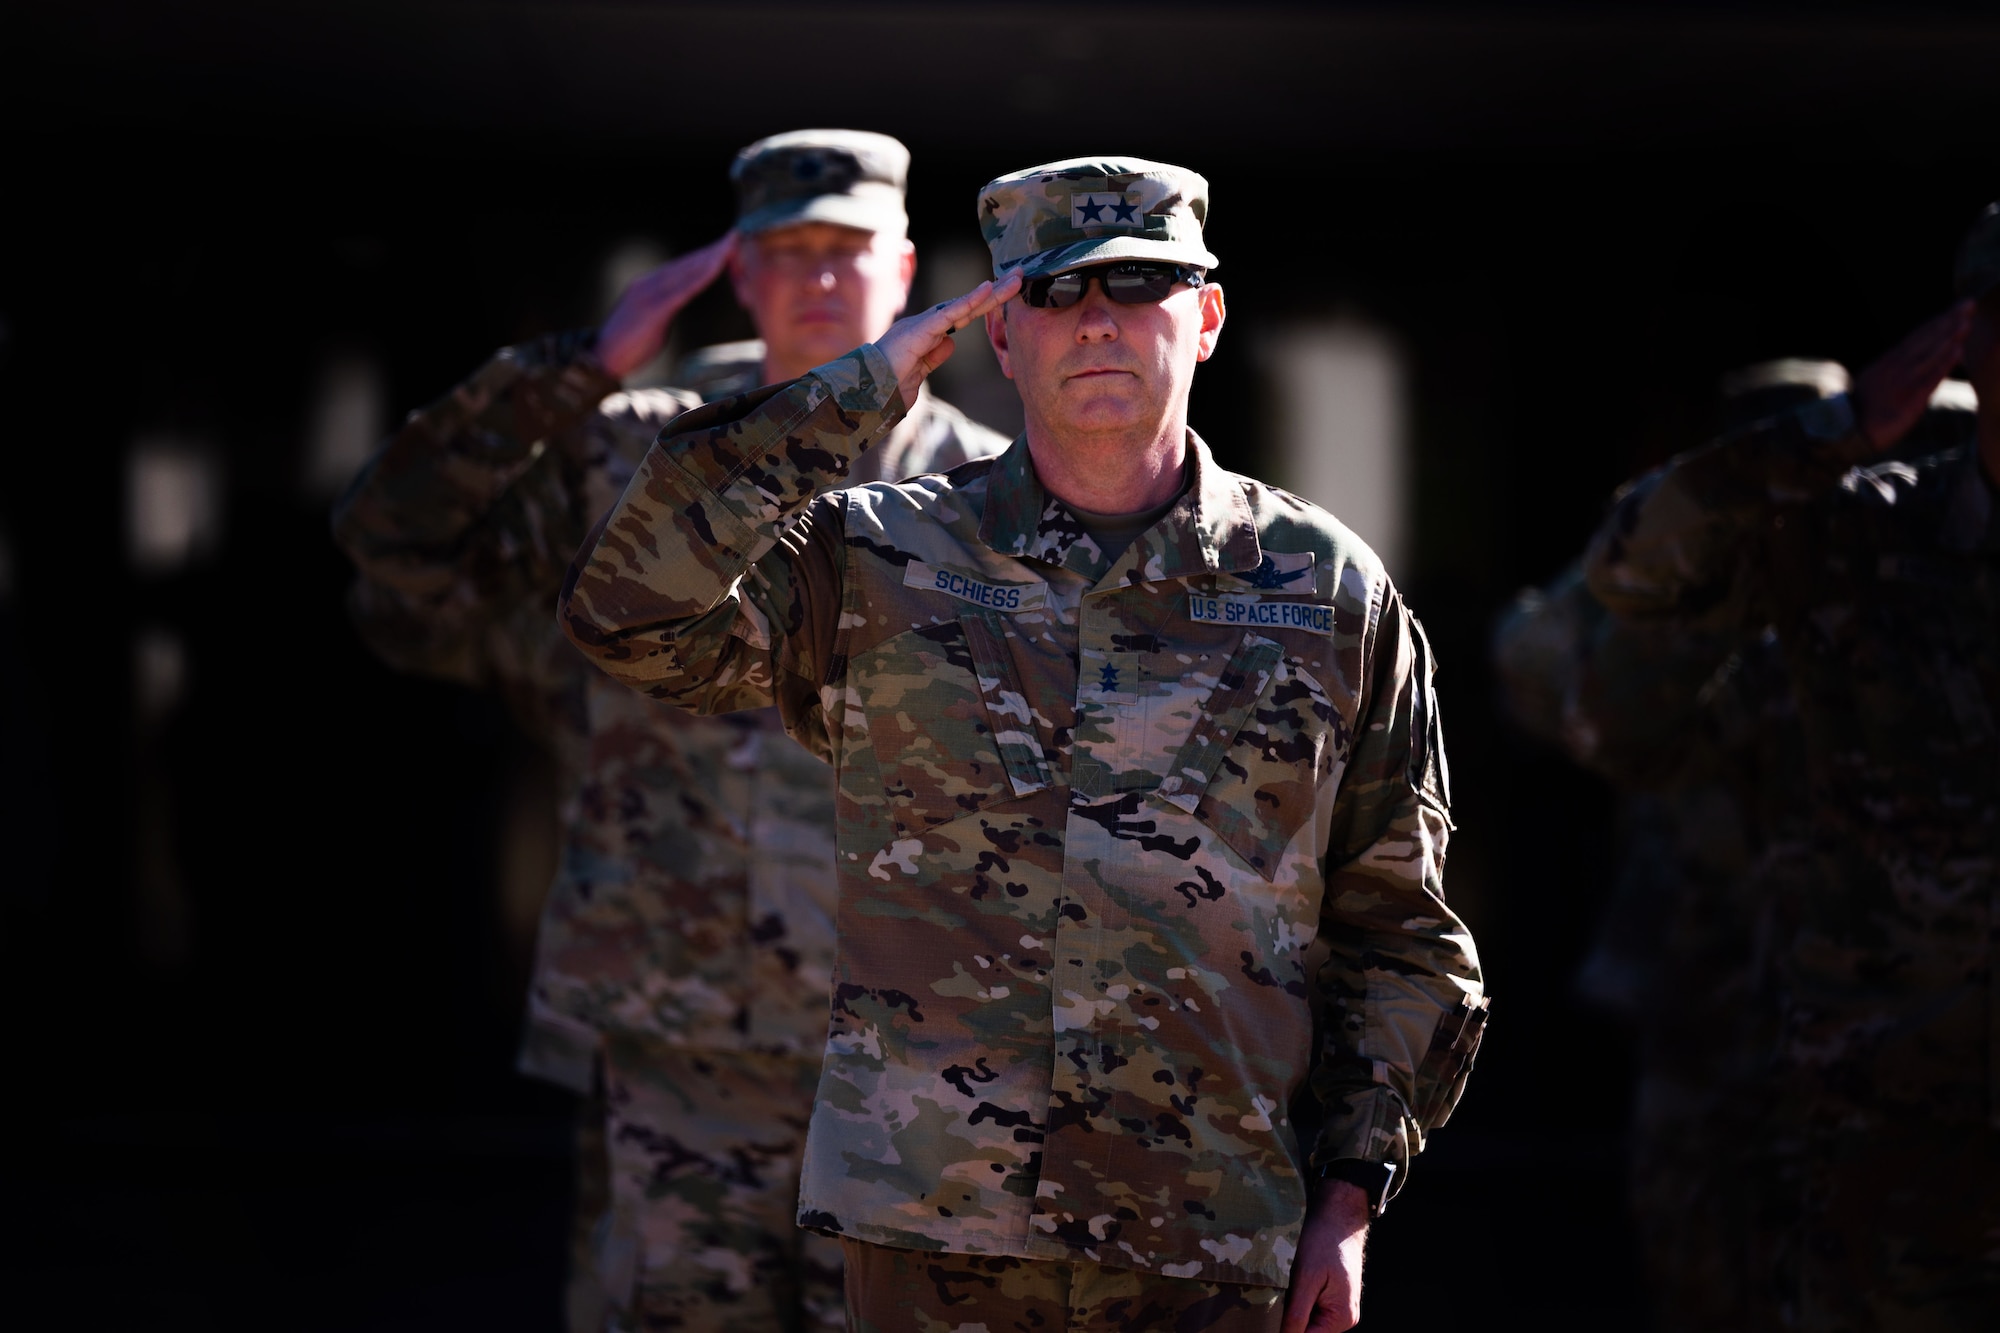 U.S. Space Force Maj. Gen. Douglas A. Schiess, Combined Force Space Component Command (CFSCC) commander, renders a salute during a retreat ceremony at Vandenberg Space Force Base, Calif., Aug. 31, 2022.